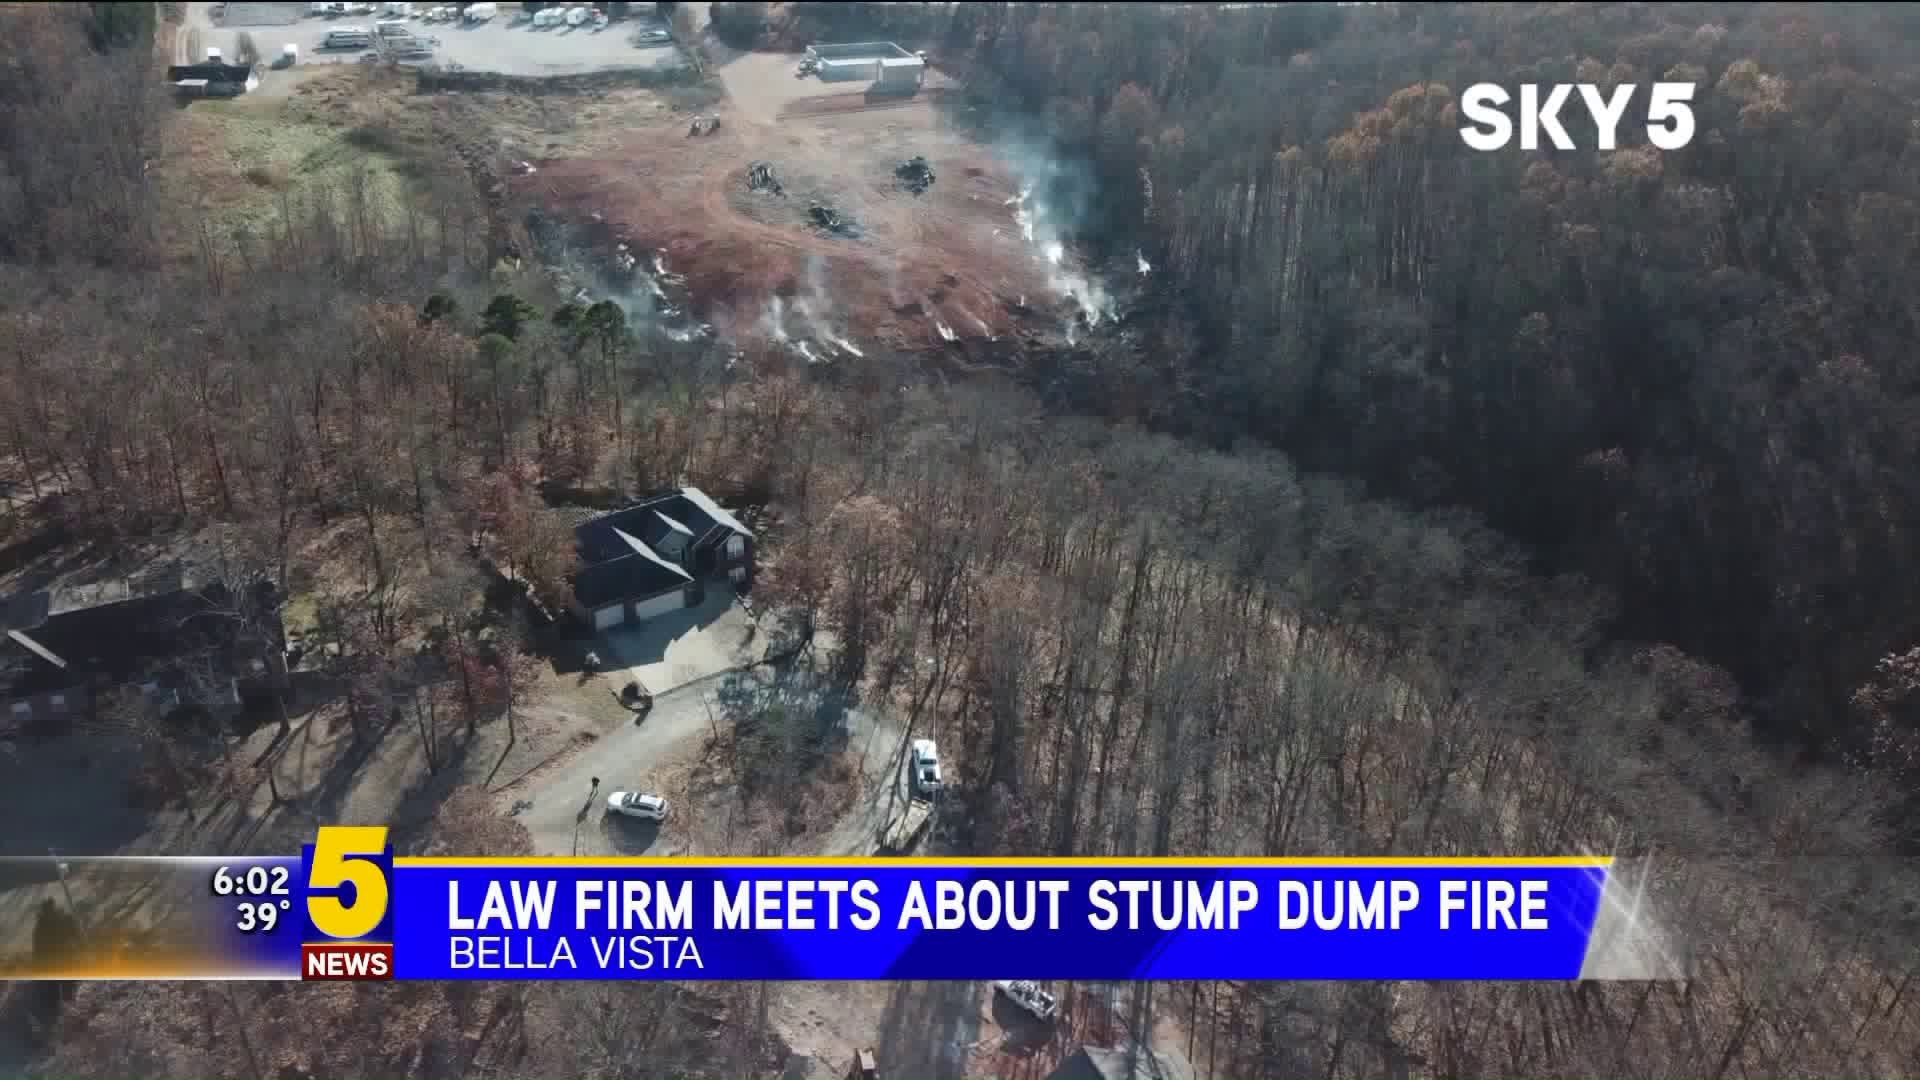 Lawsuit To Be Filed About Stump Dump Fire In Bella Vista